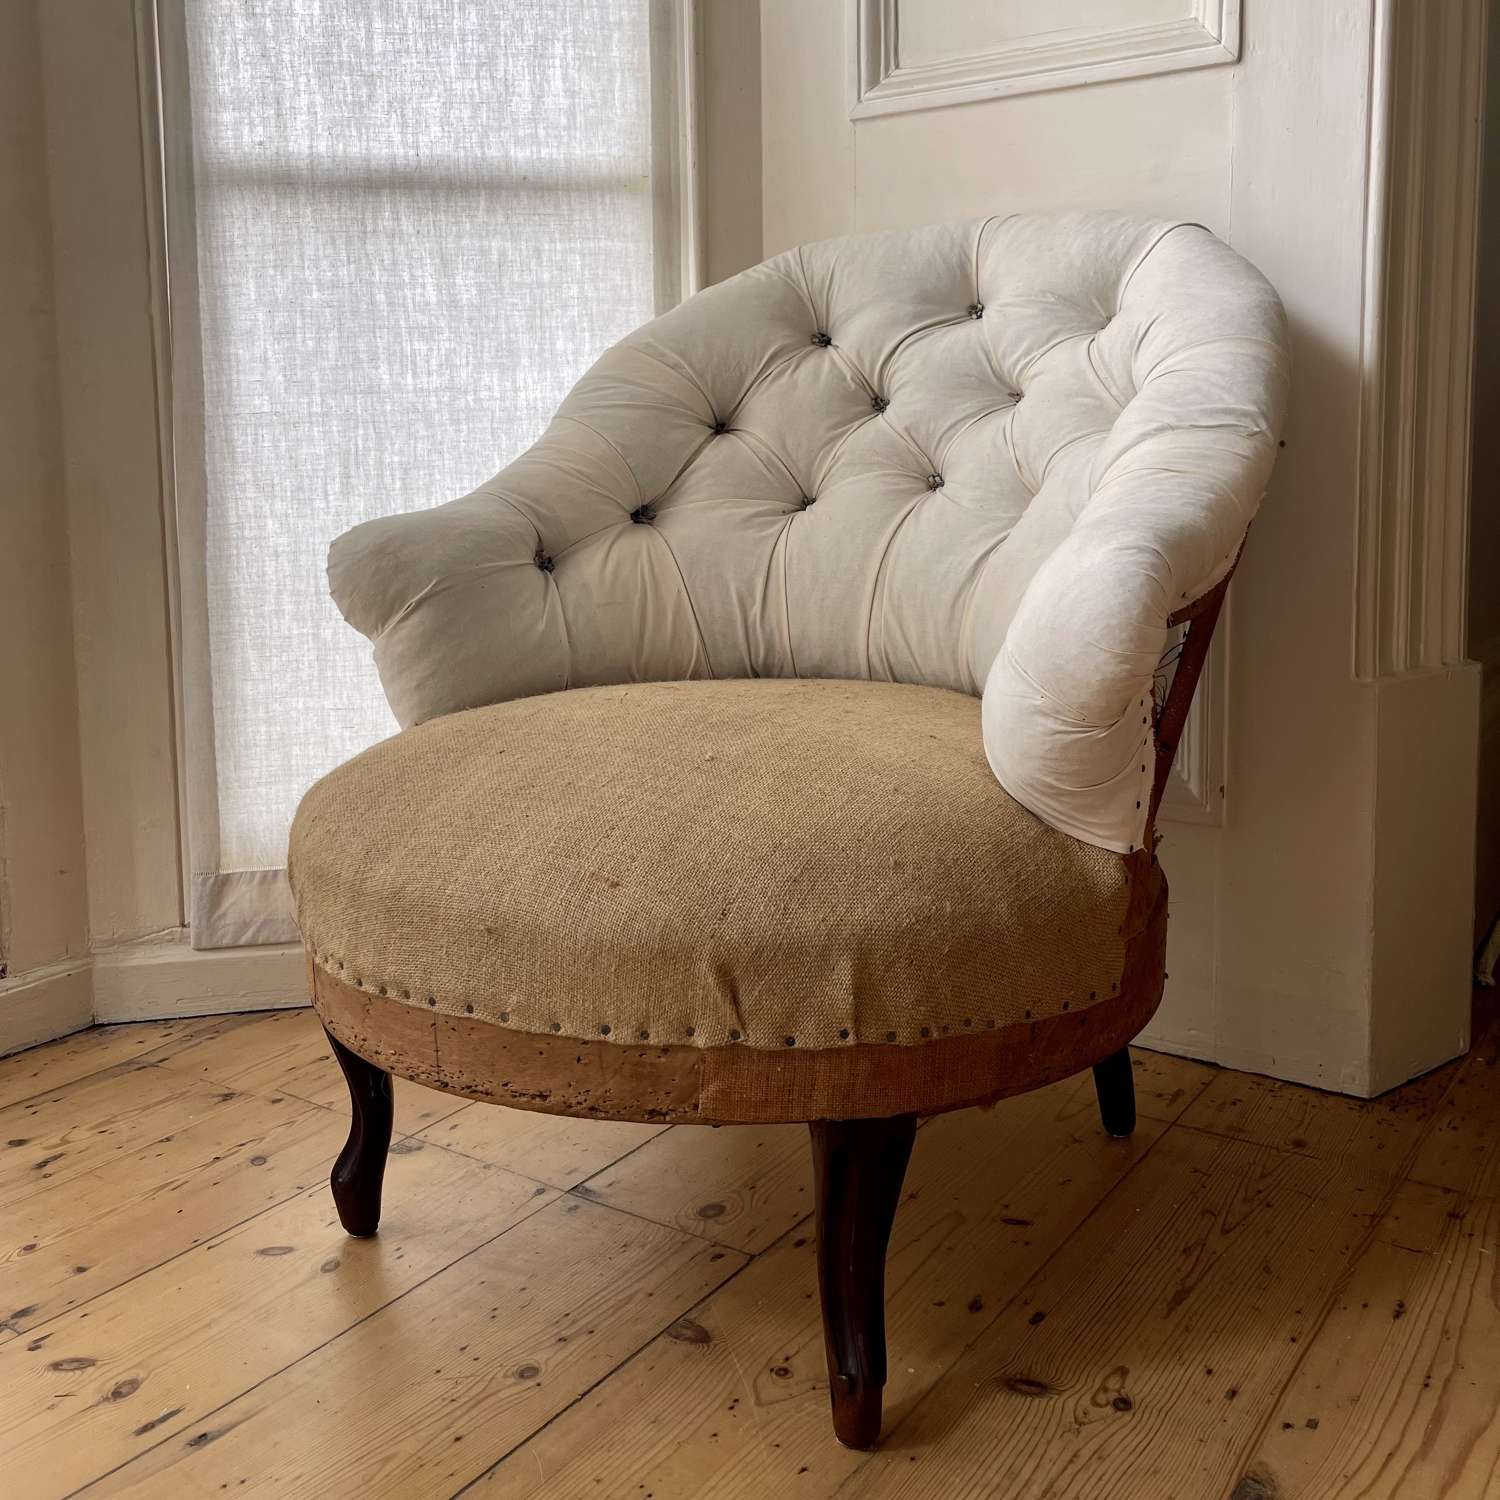 19th century French button back chair